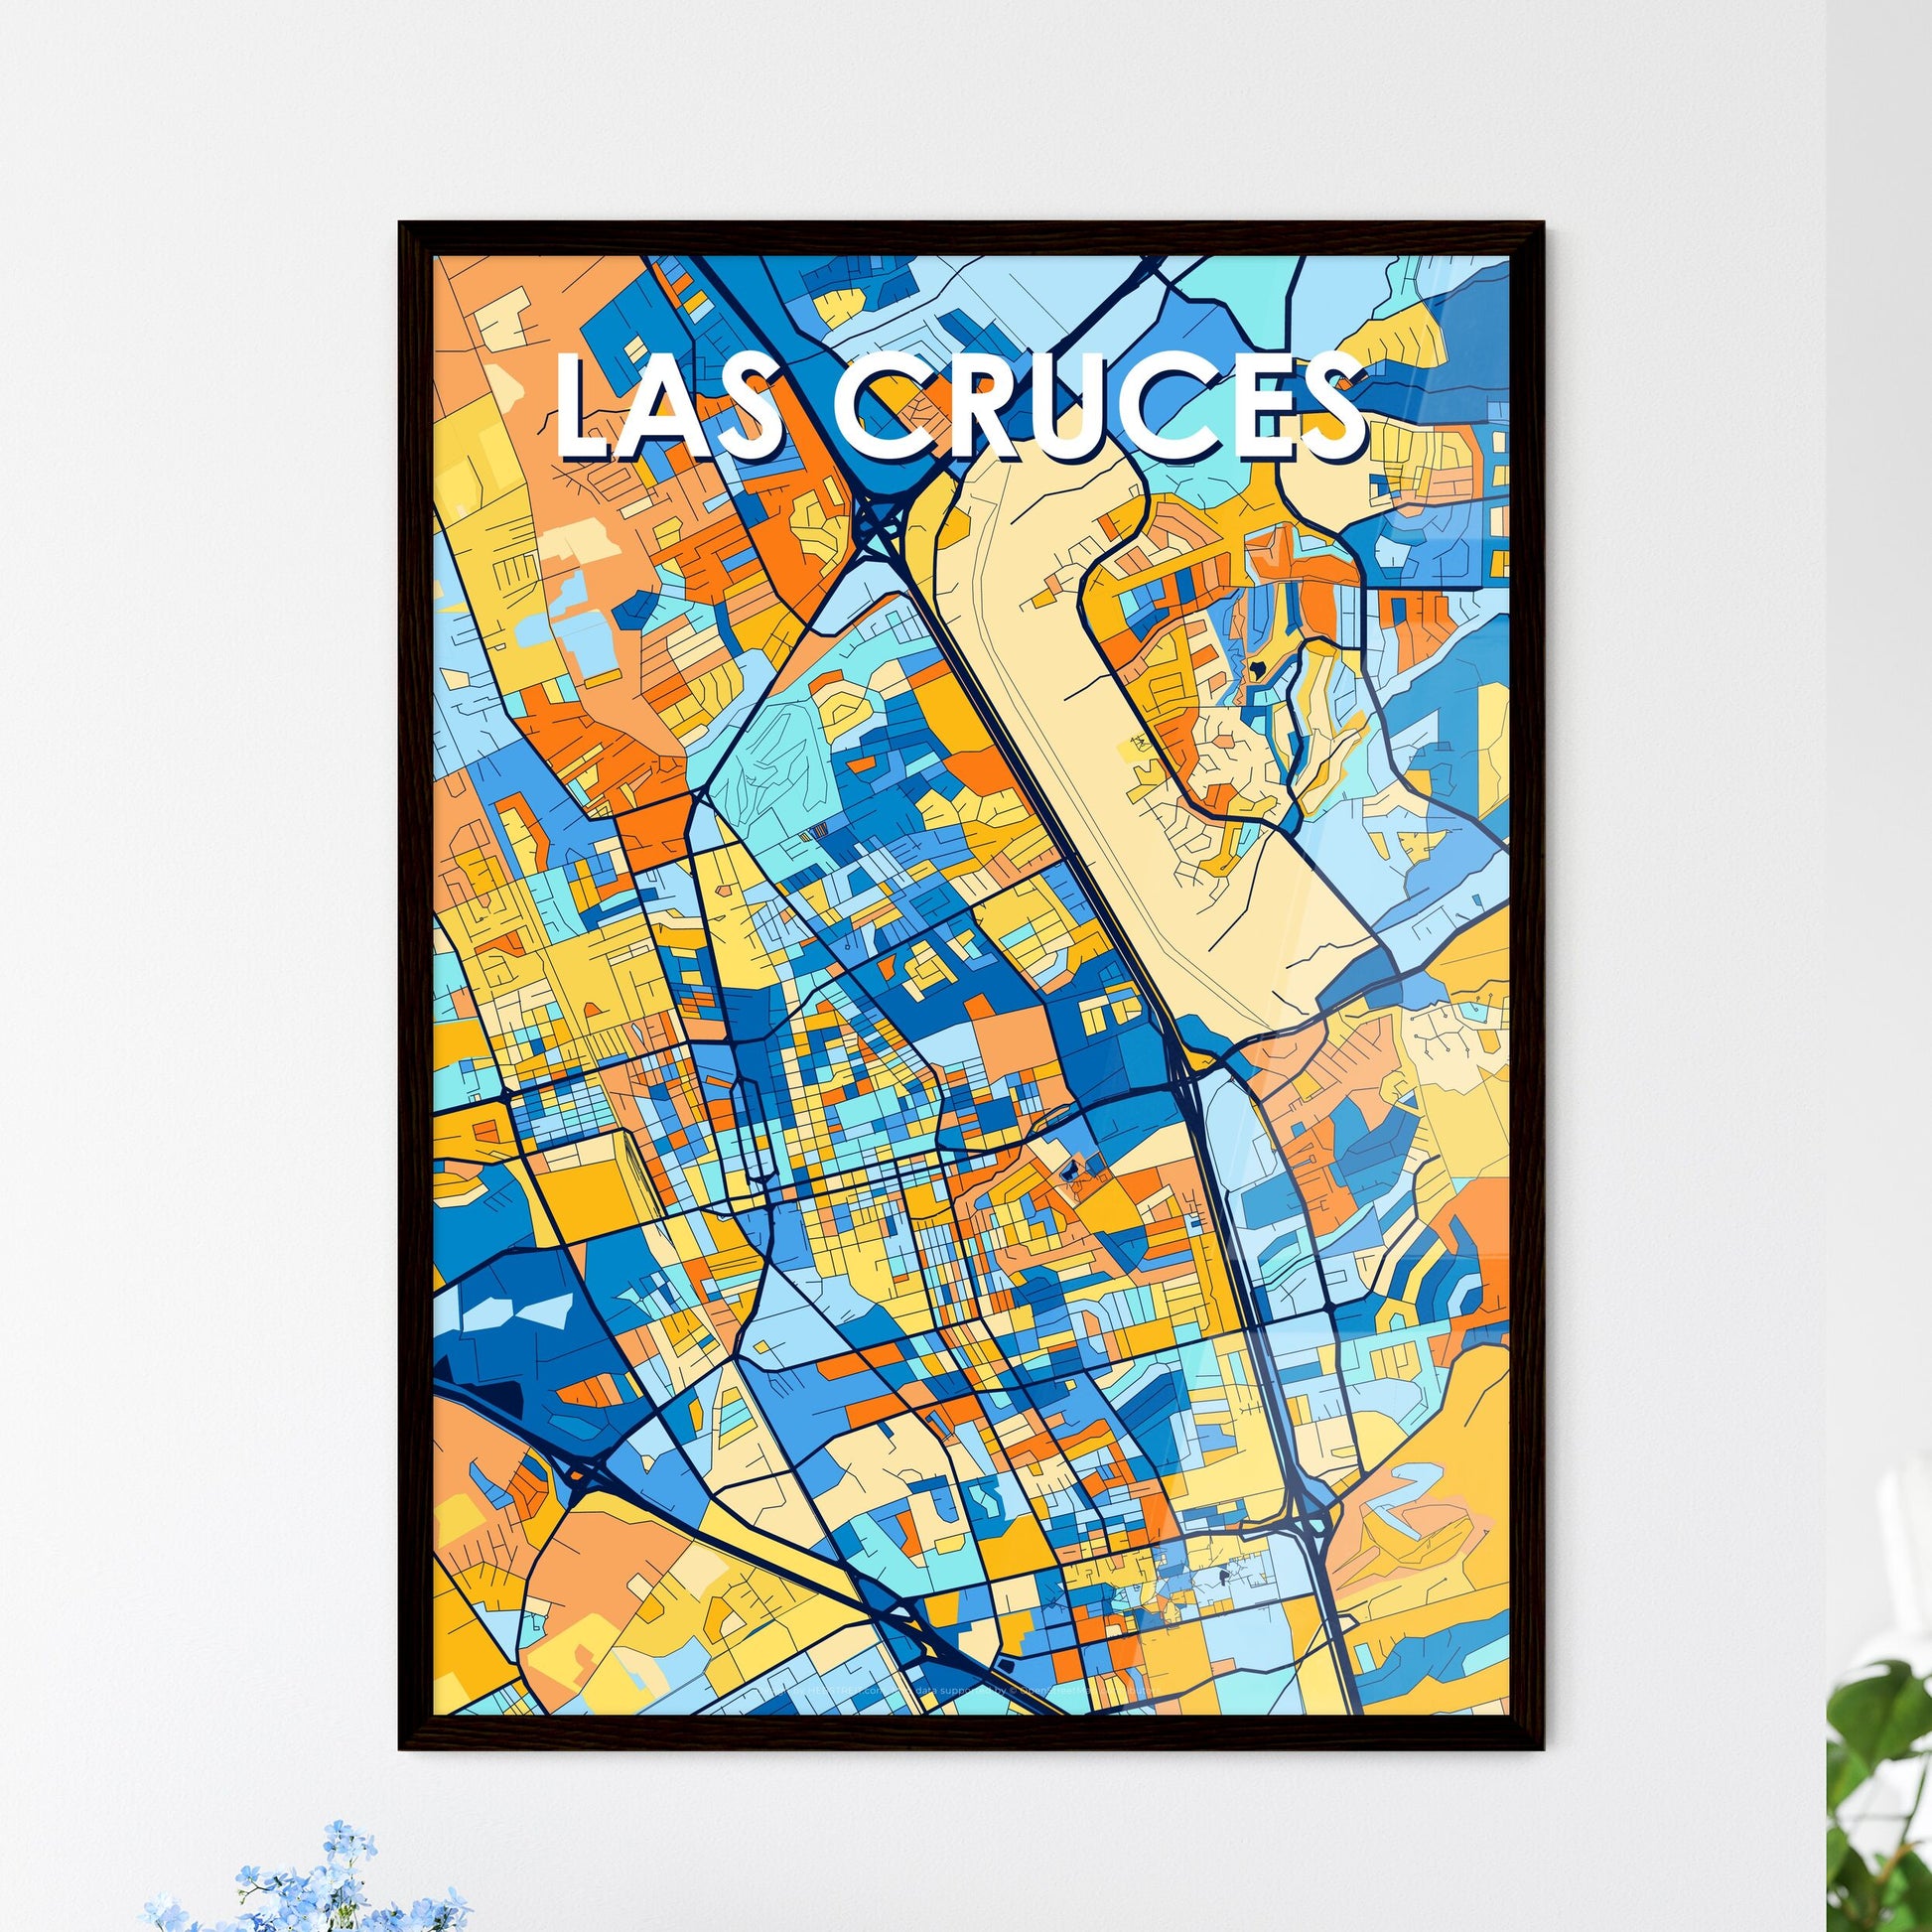 Las Cruces, New Mexico  Galleries, Museums & Performing Arts